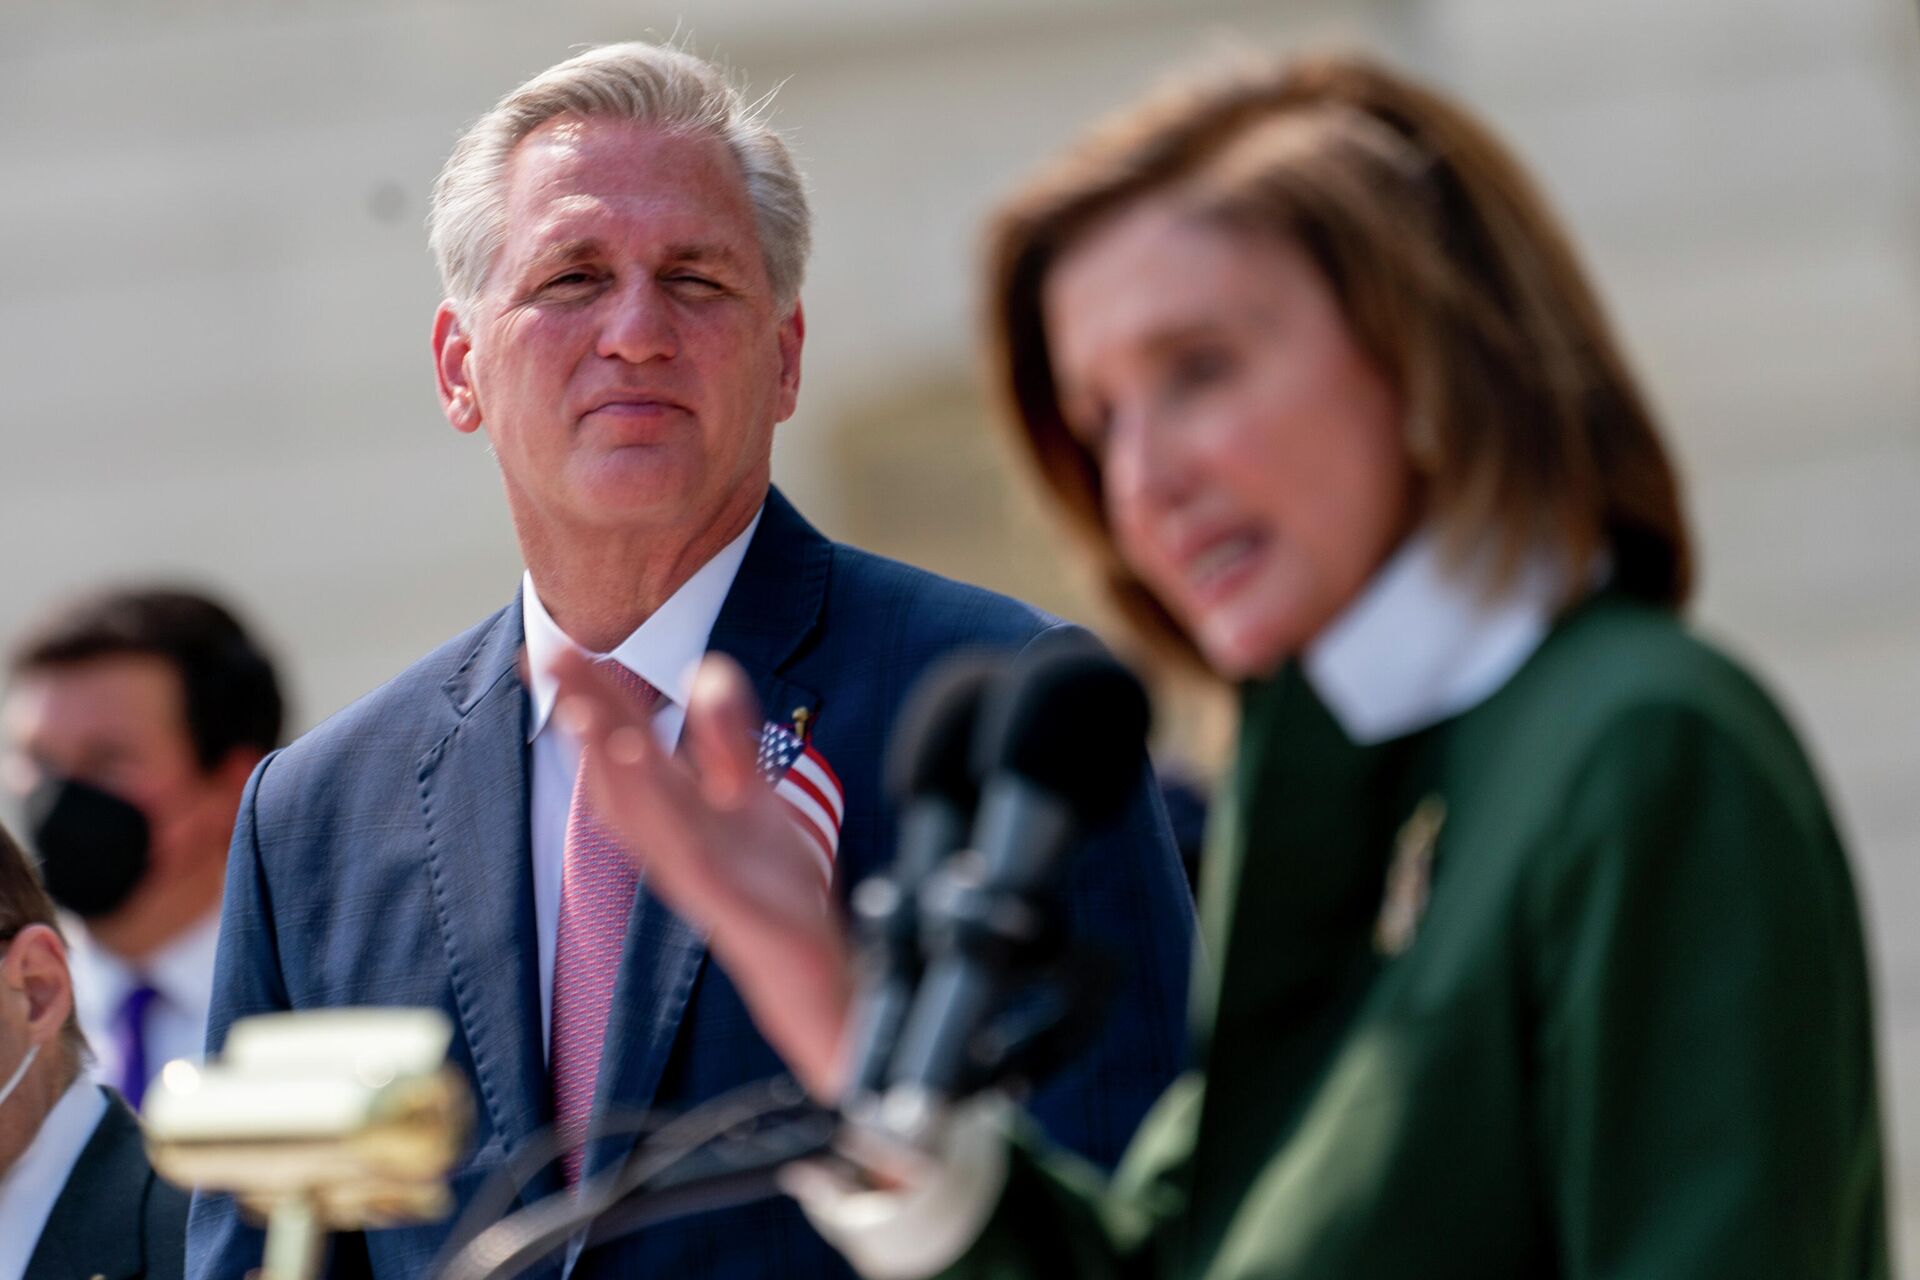 House Speaker Nancy Pelosi of Calif., right, accompanied by House Minority Leader Kevin McCarthy of Calif., left, speaks during a Congressional Remembrance Ceremony marking the 20th anniversary of the Sept. 11, 2001, terrorist attacks, on Capitol Hill in Washington, Monday, Sept. 13, 2021. - Sputnik International, 1920, 13.10.2021